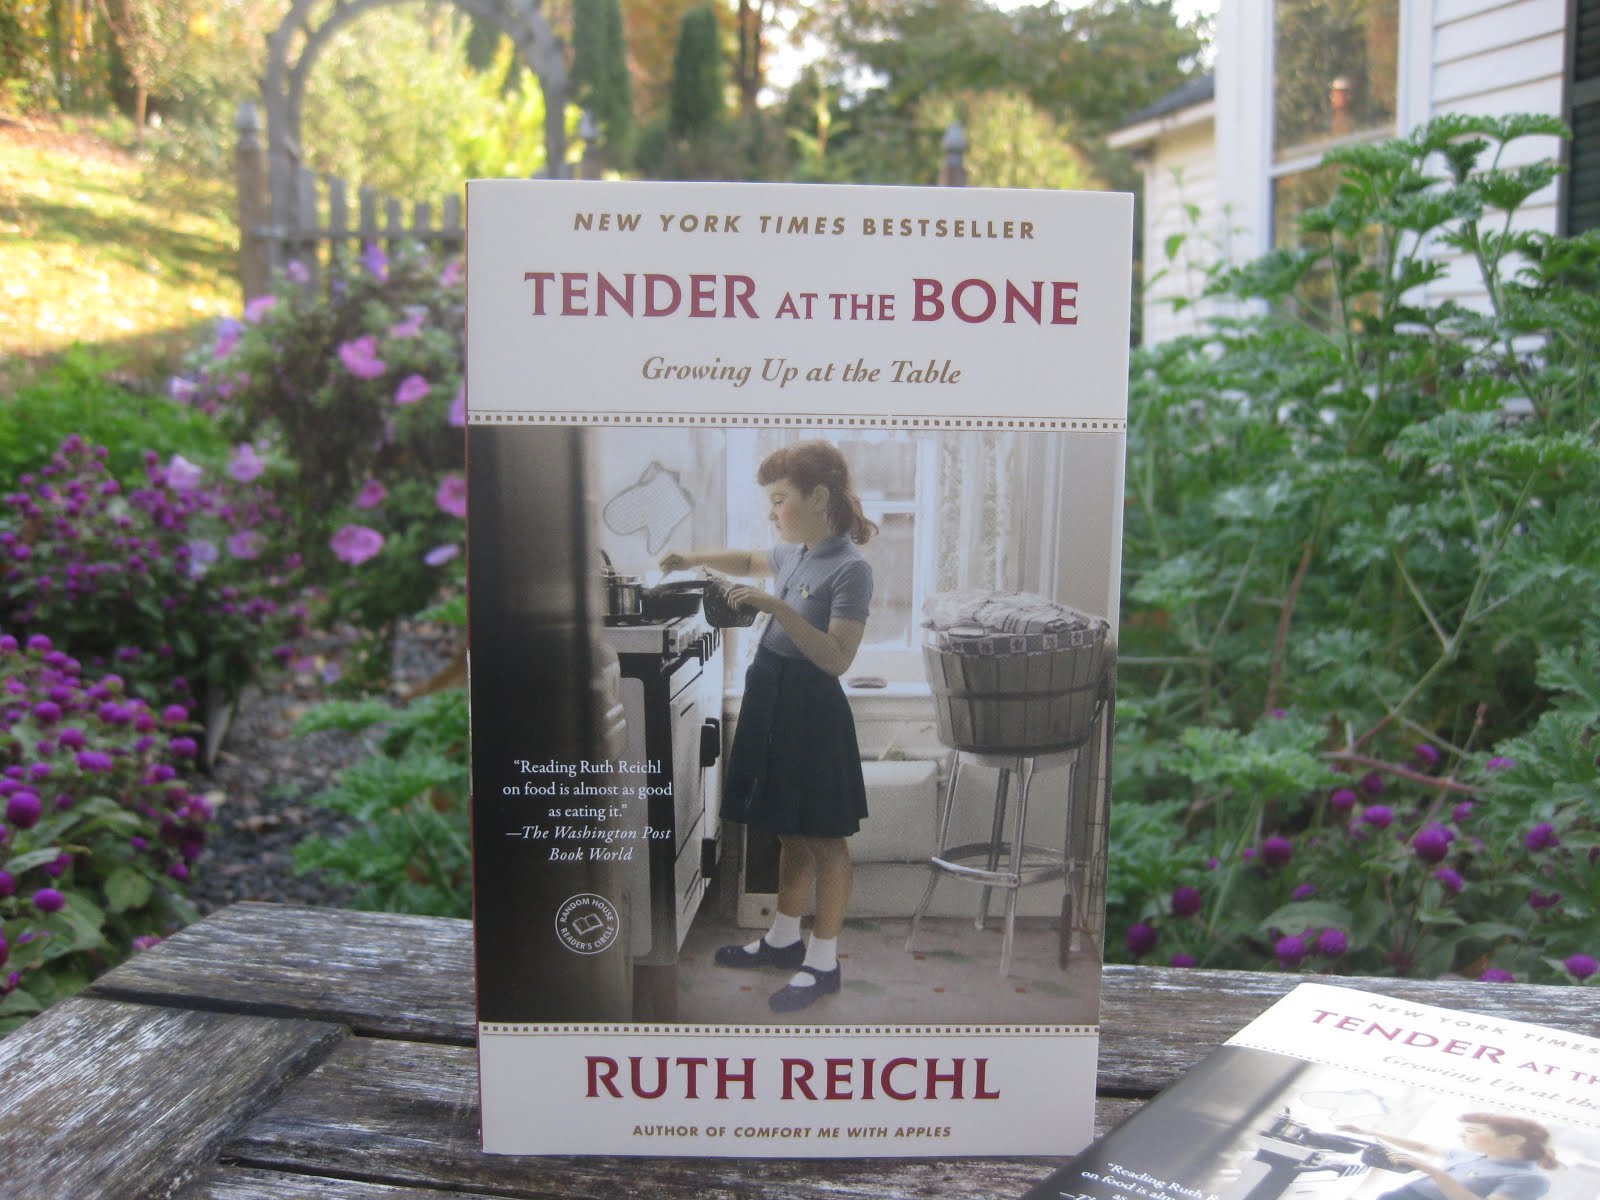 Tender at the Bone by Ruth Reichl